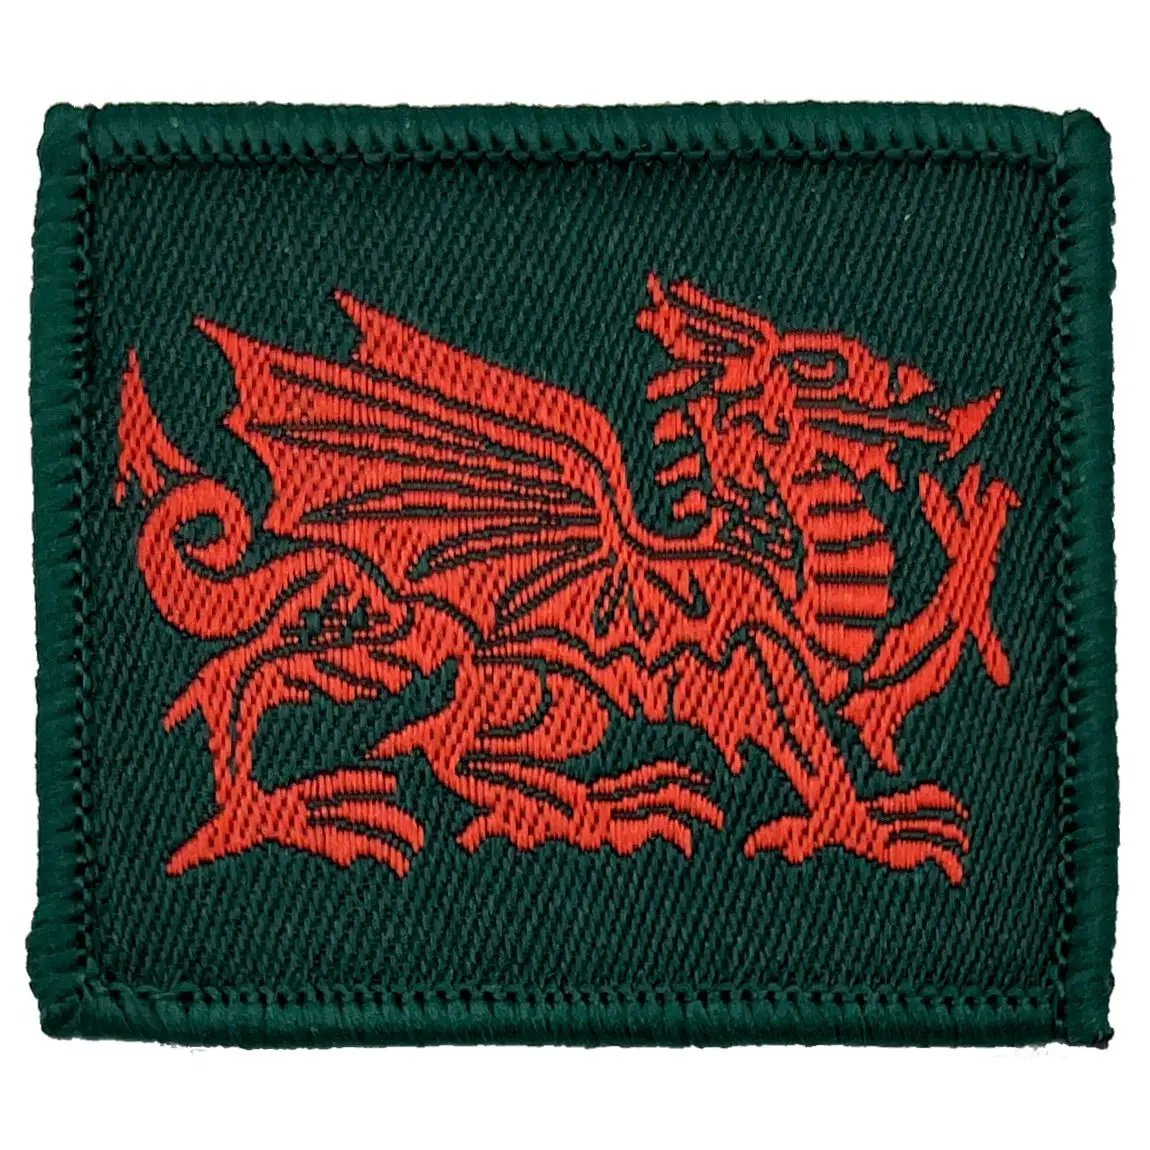 Royal Welsh TRF - Iron or Sewn On Patch - John Bull Clothing